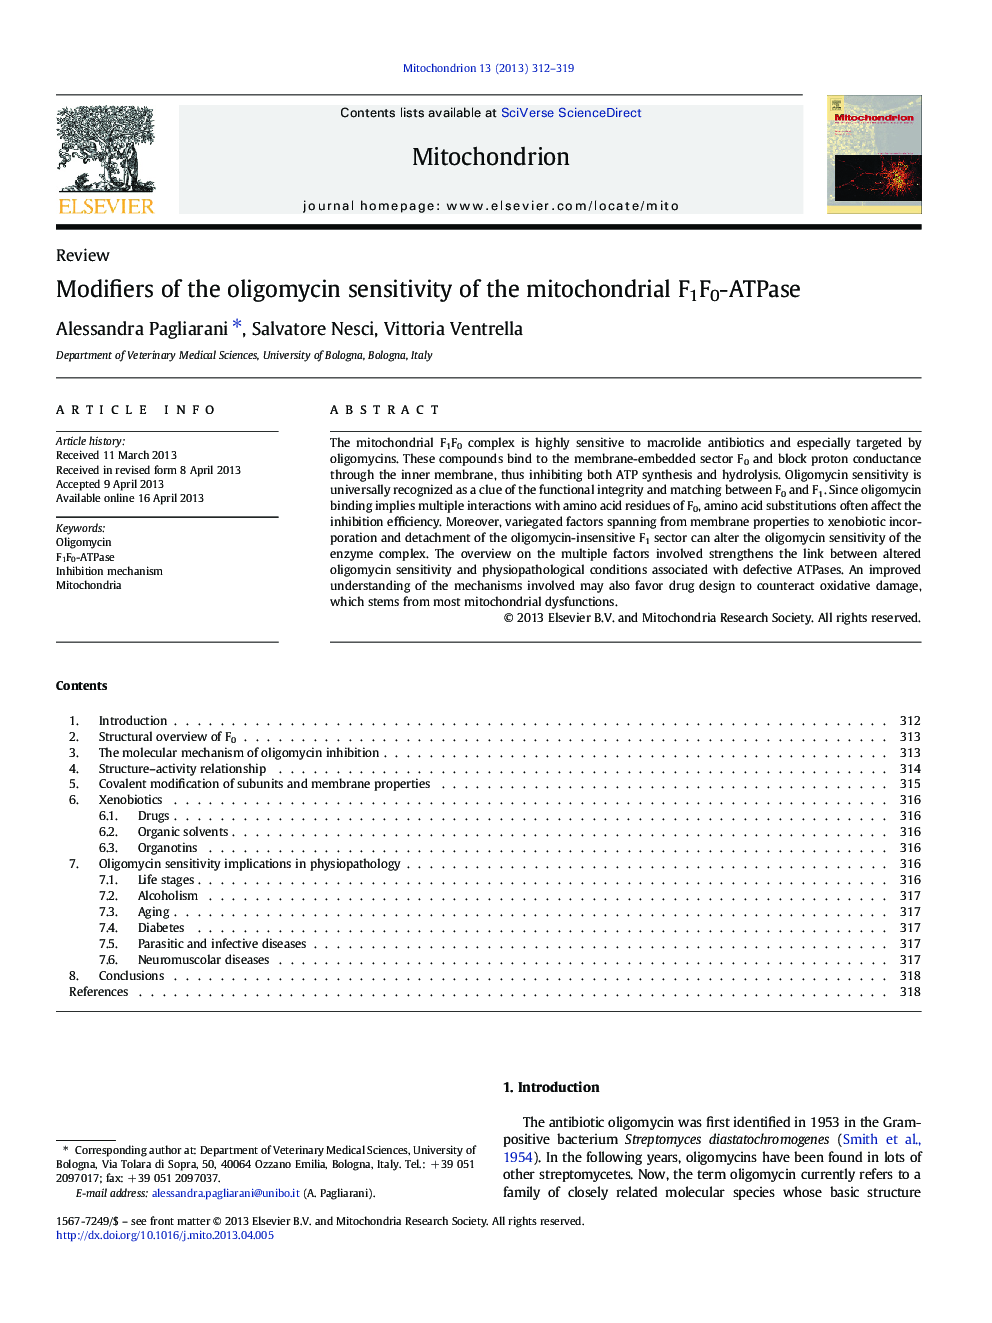 Modifiers of the oligomycin sensitivity of the mitochondrial F1F0-ATPase